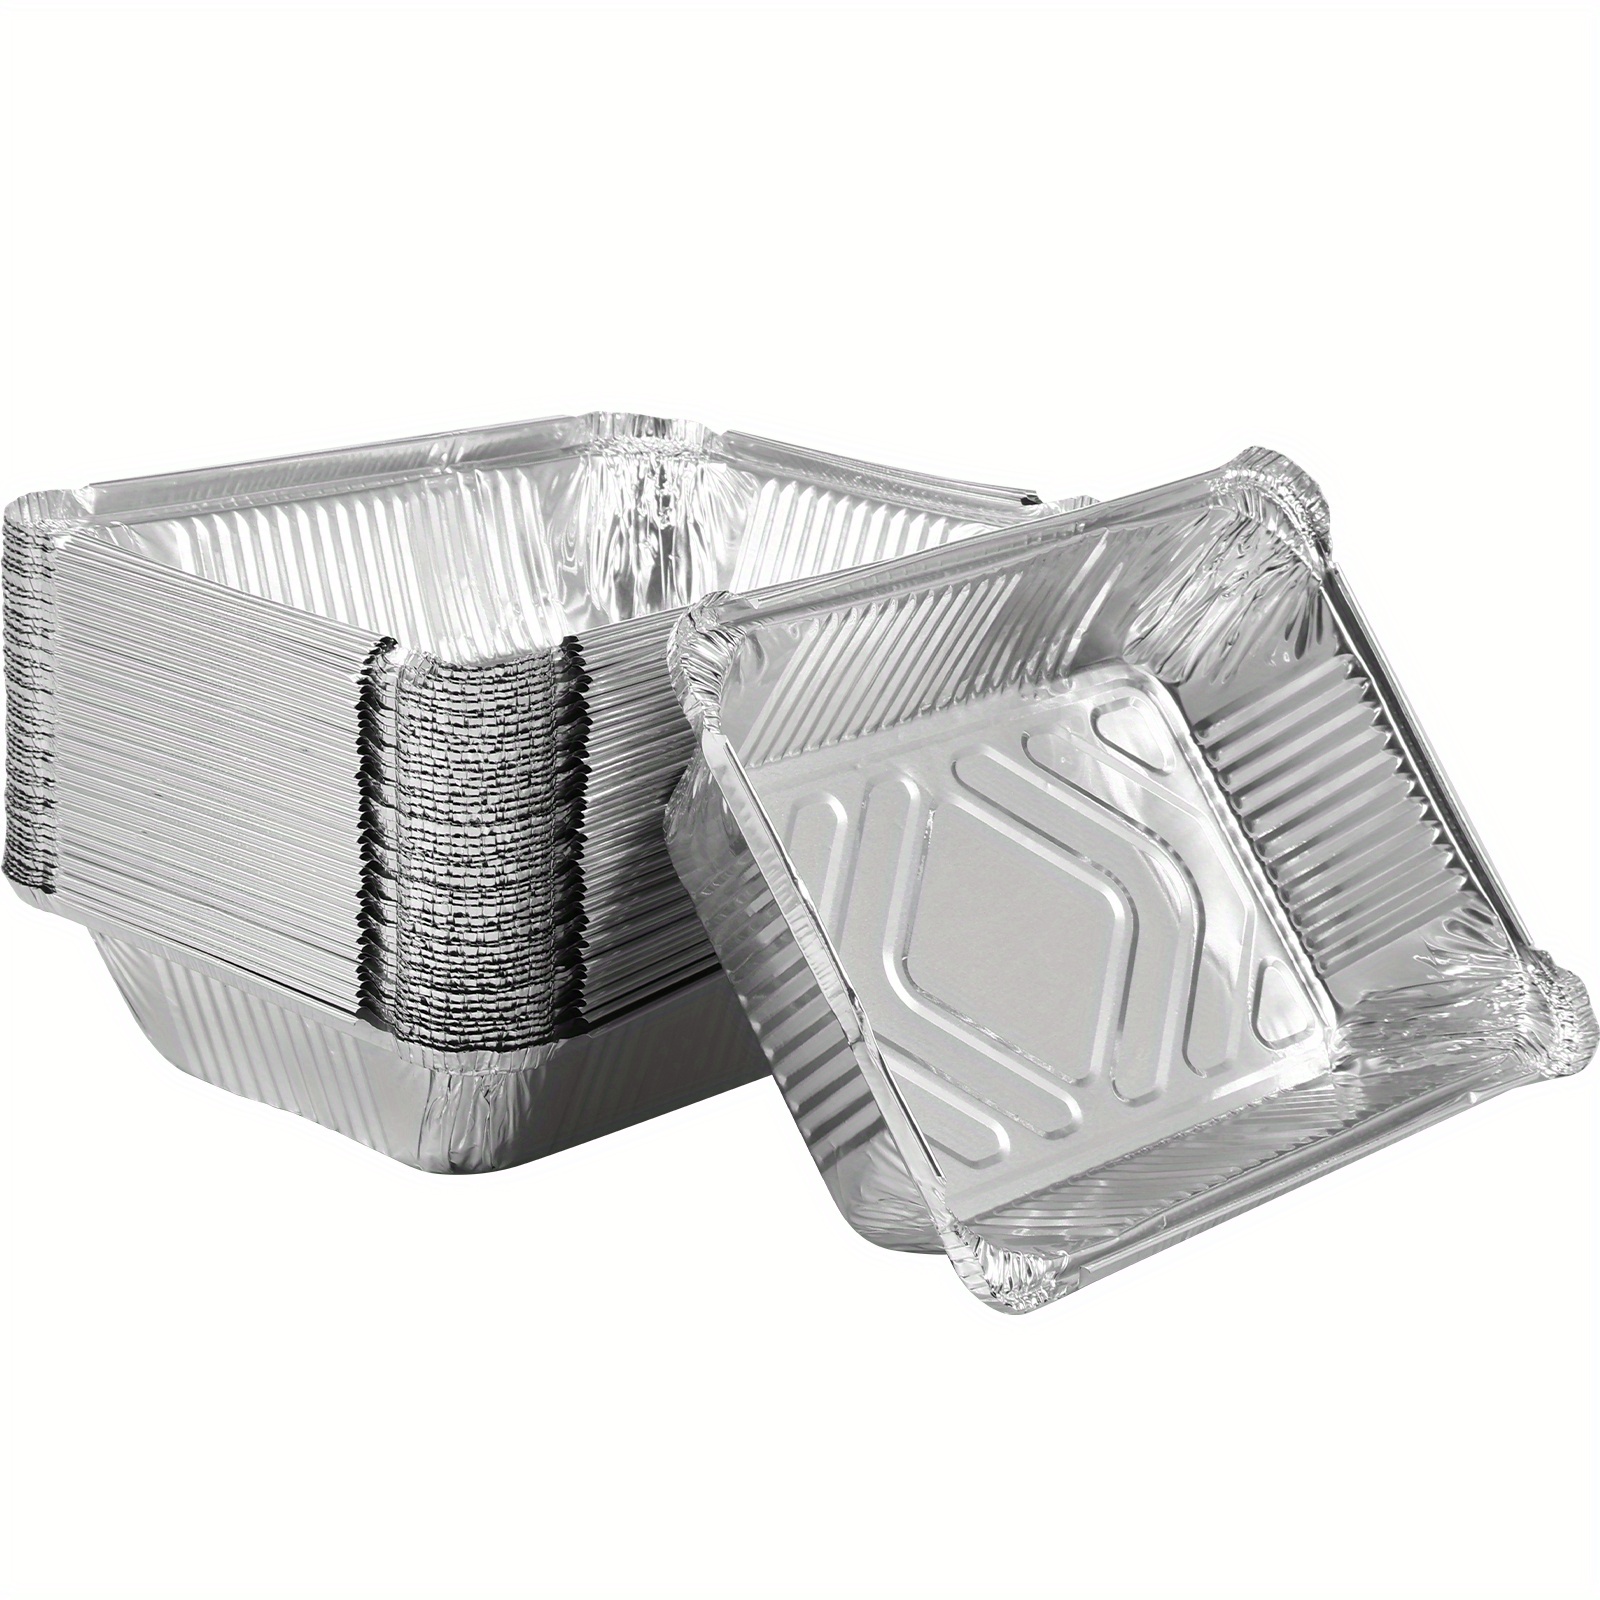  ULTECHNOVO 50Pcs Aluminum foil tin box containers for food foil  food containers bbq pan liners bbq tin foil tray disposable foil liners  aluminium trays bbq accessories cooking utensils bulk: Home 